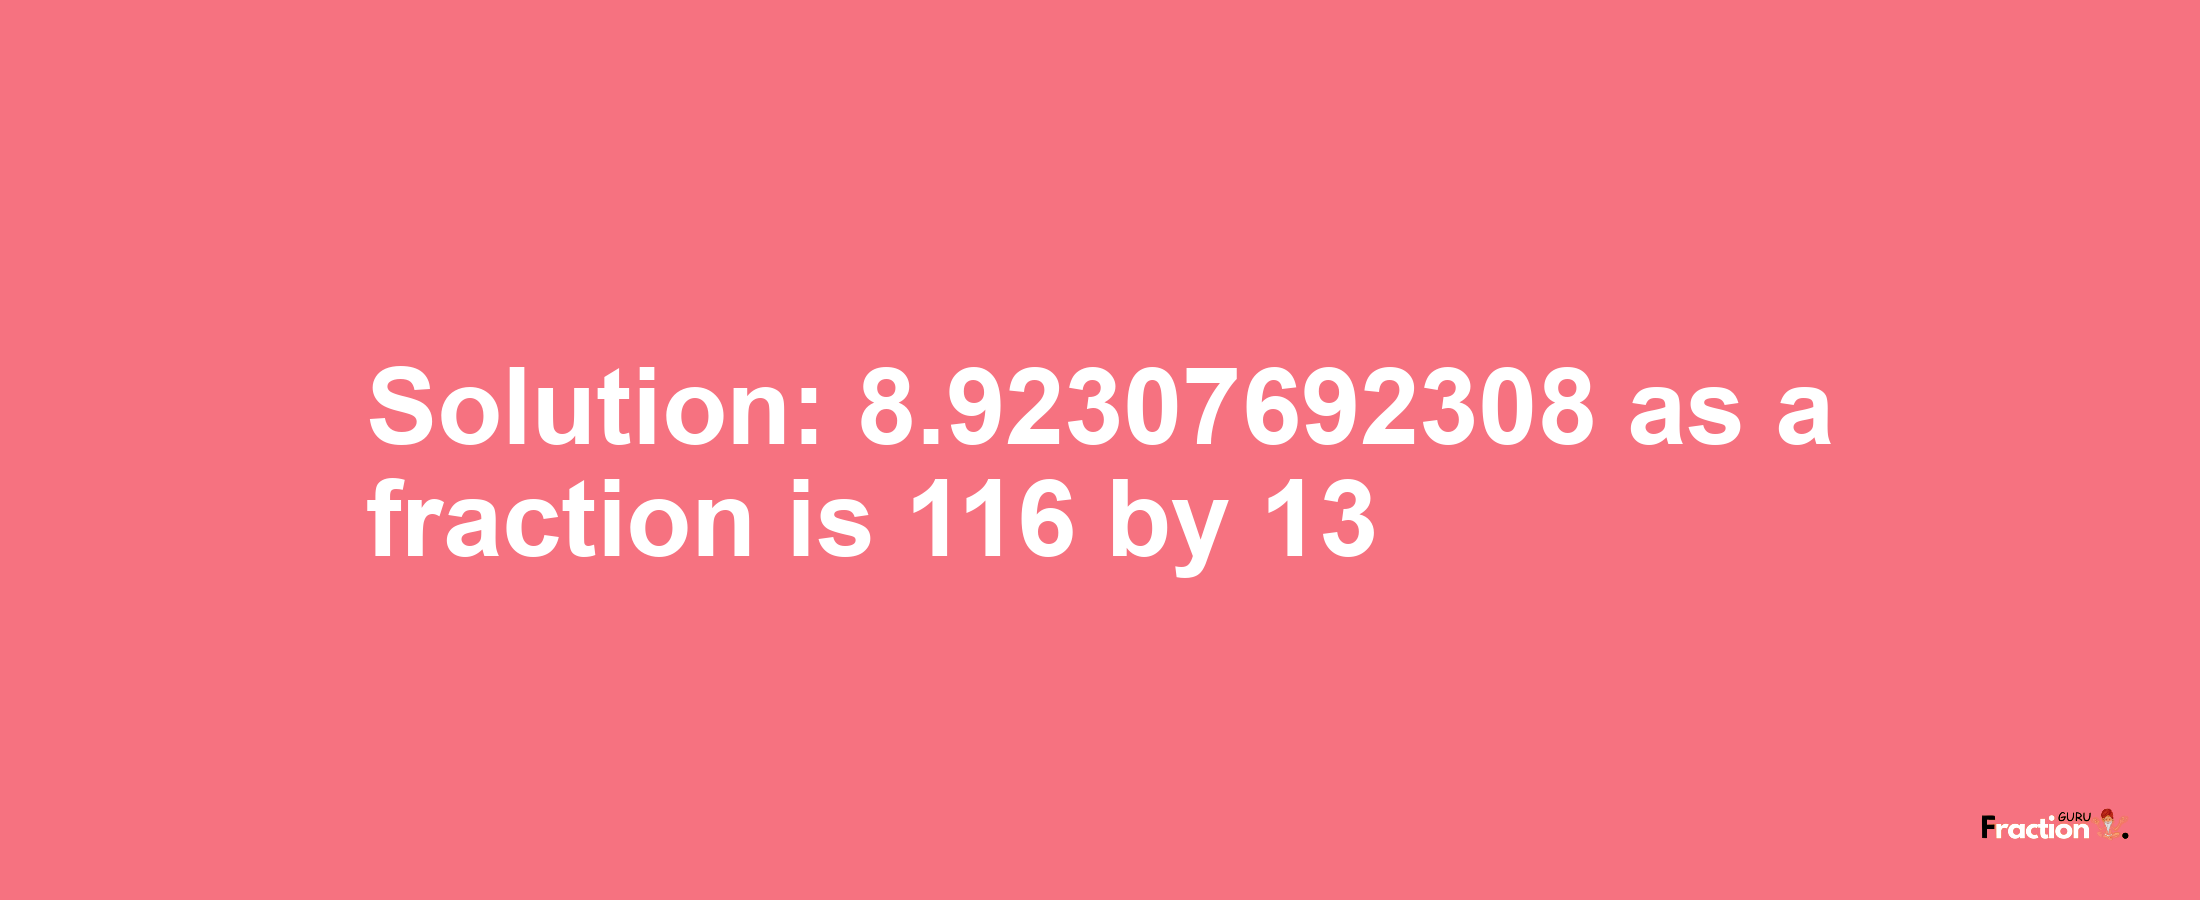 Solution:8.92307692308 as a fraction is 116/13